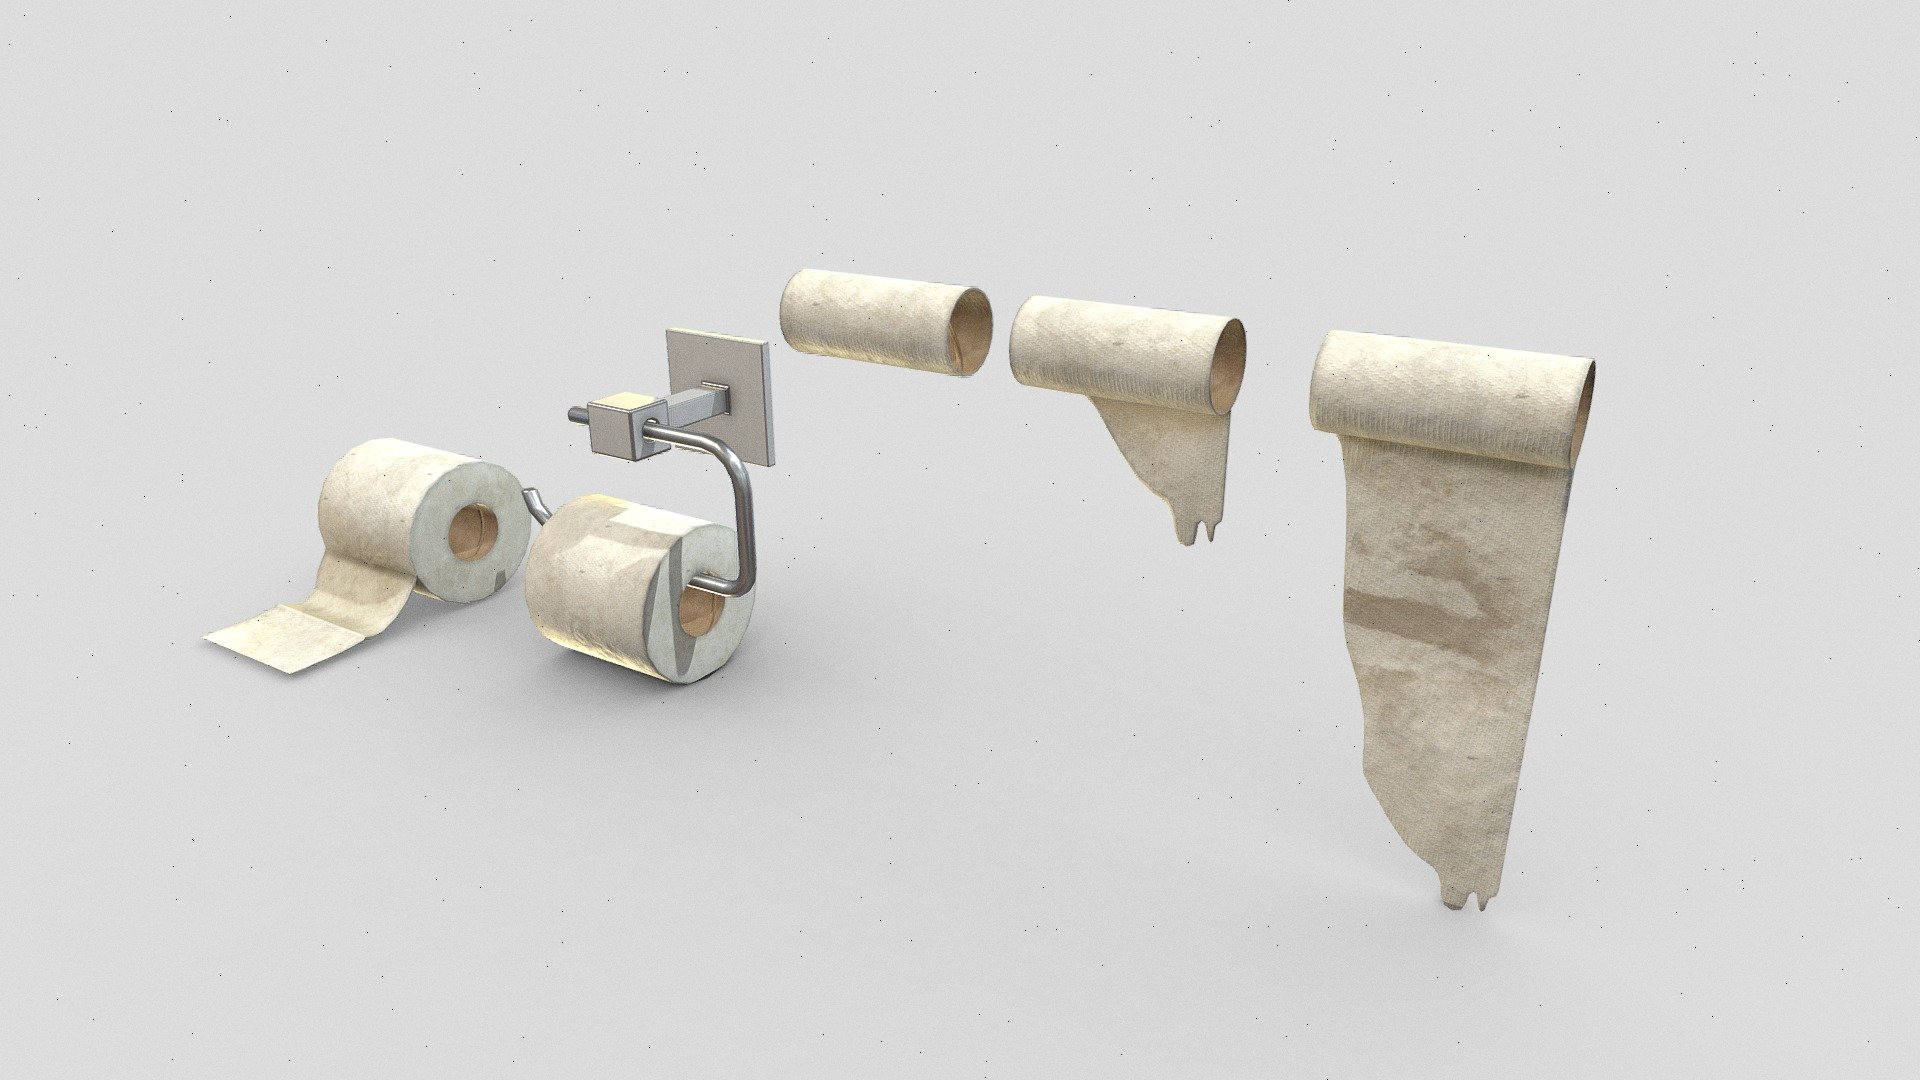 A selection of toilet rolls and a holder.  Slight worn and would be a handy prop for any sort of interior scene.

PBR texttures @4k - Toilet rolls - Buy Royalty Free 3D model by Sousinho 3d model